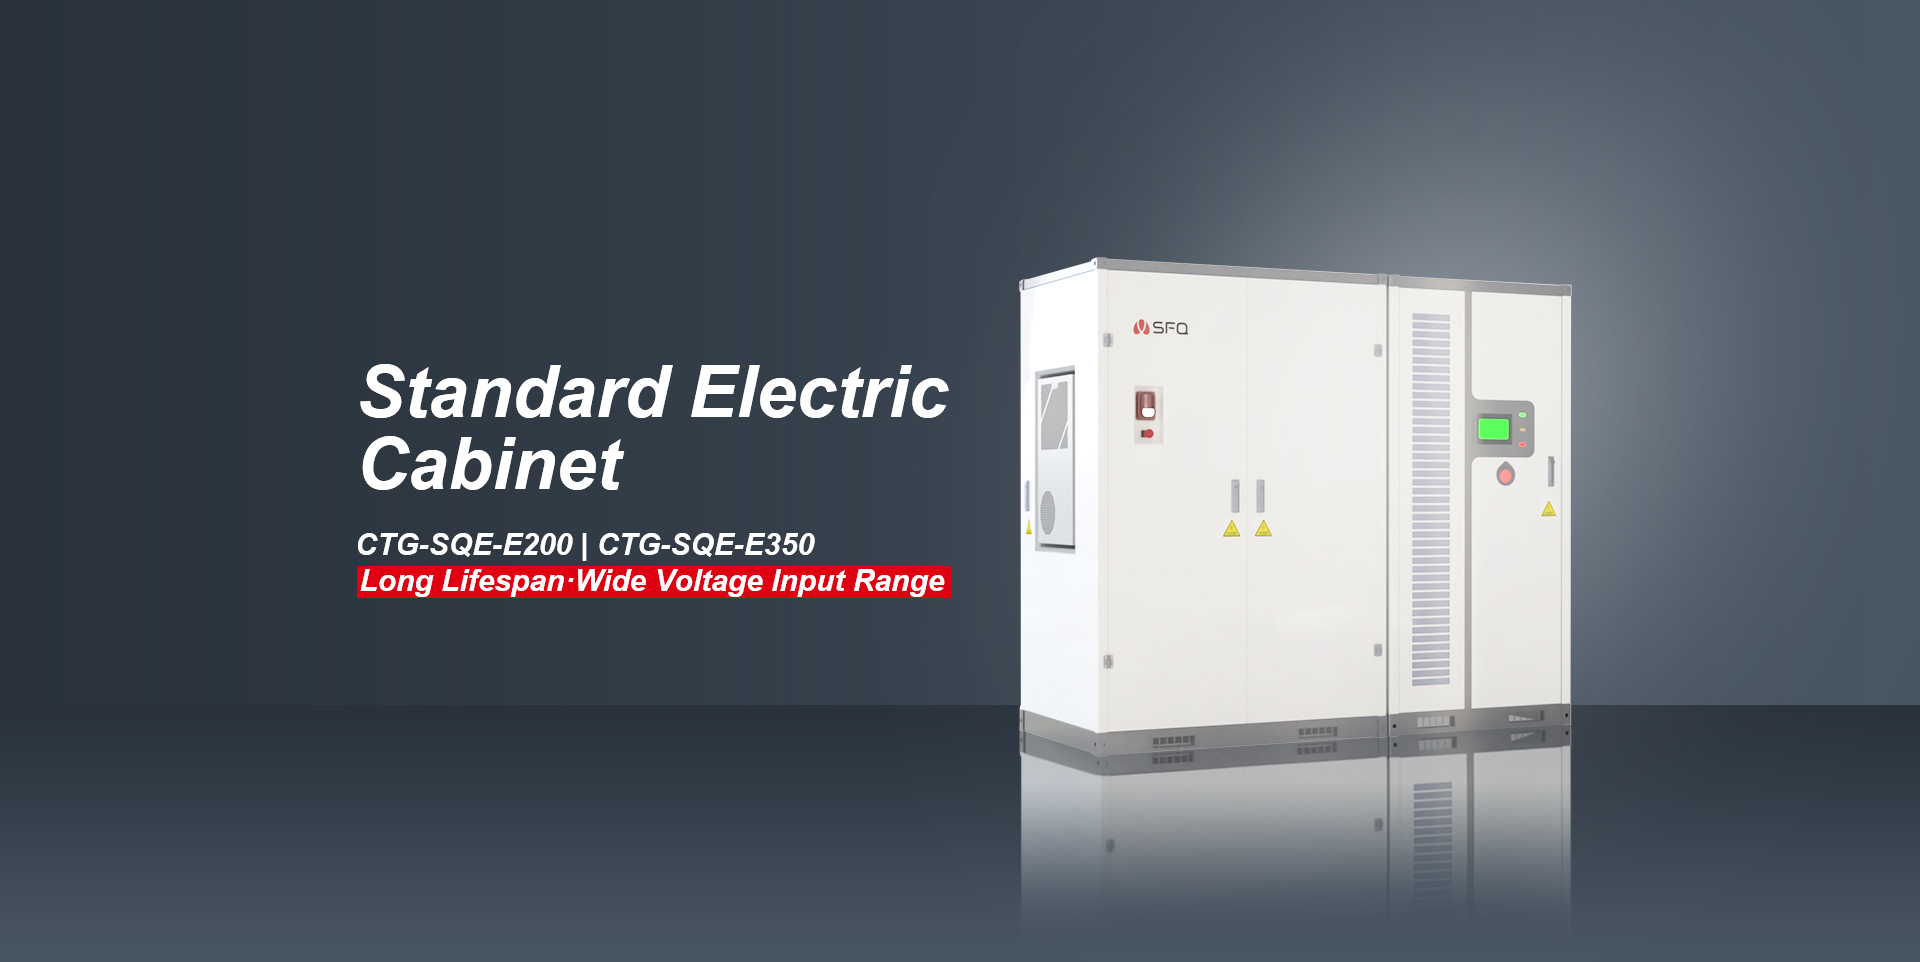 Standard Electric Cabinet